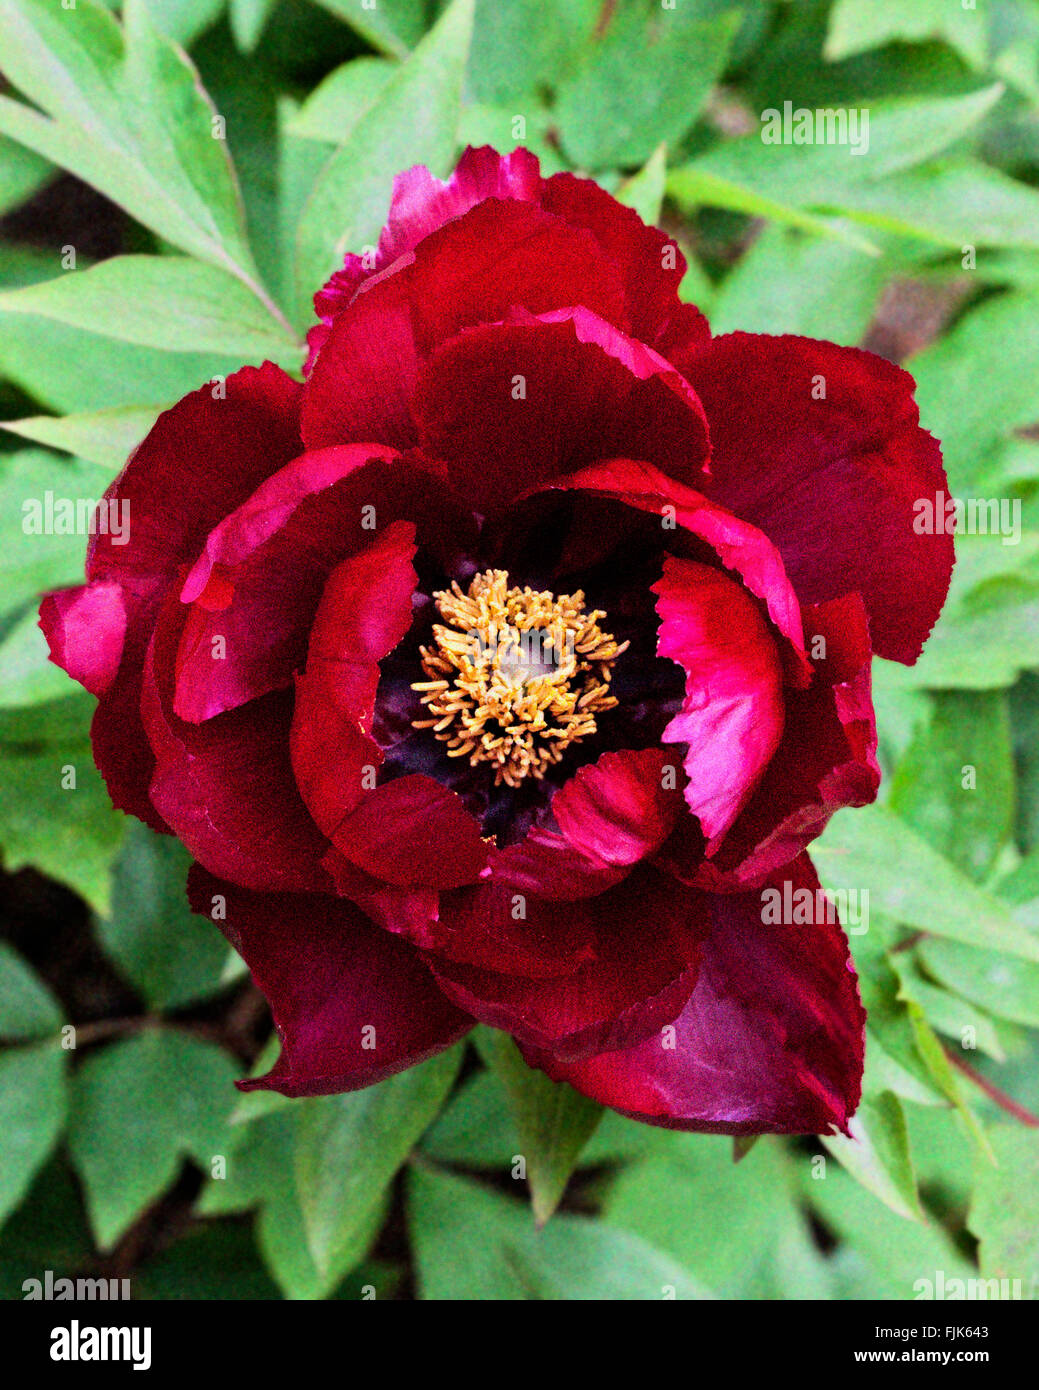 Close-up of beautiful red tree peony Paeonia suffruticosa flower in bloom Stock Photo